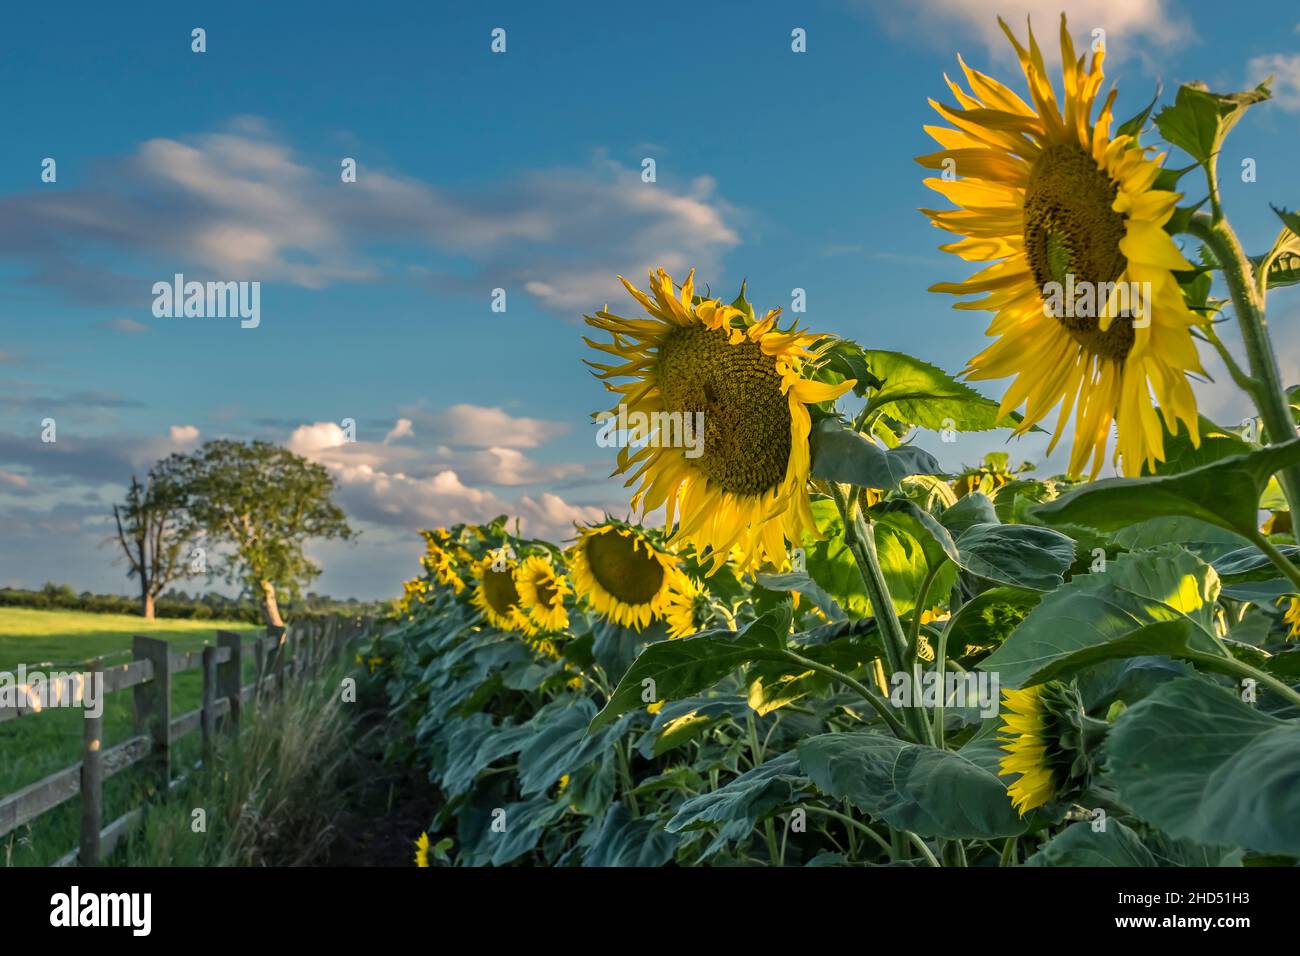 A field of sunflowers. Stock Photo